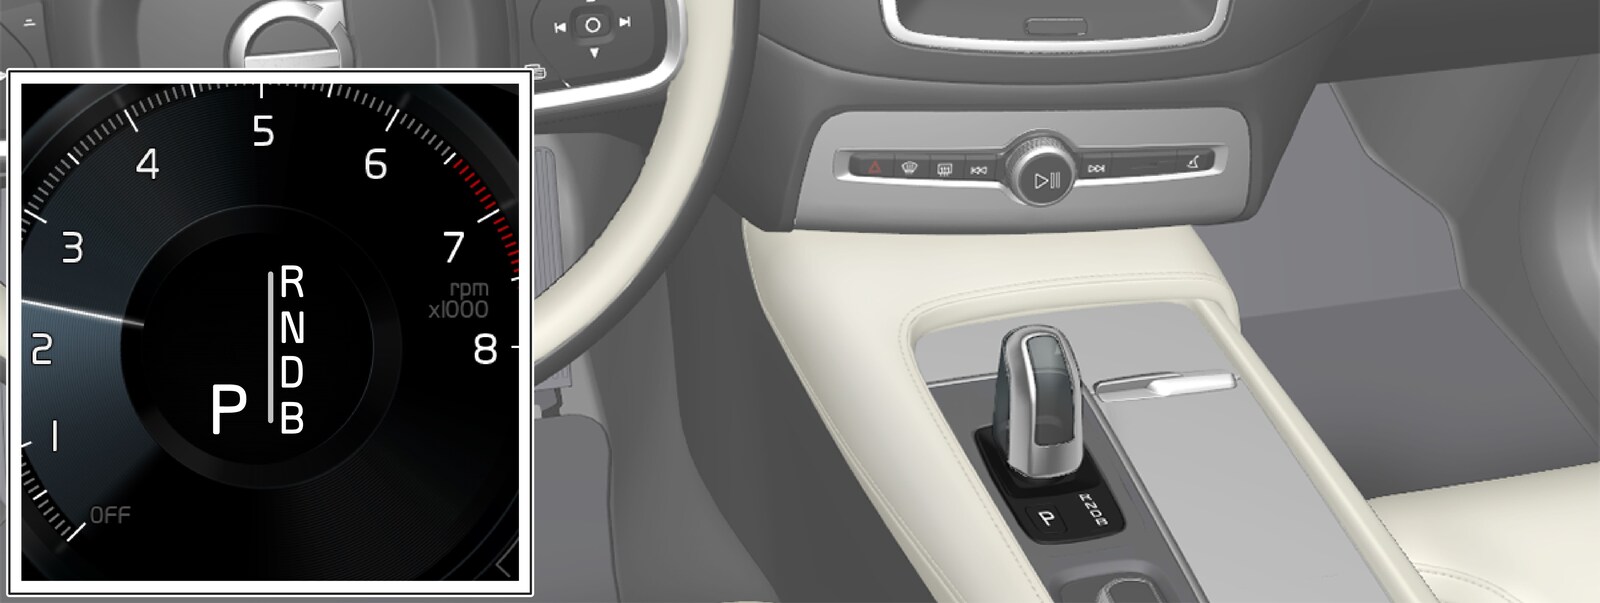 P5-1519-XC90-Hybrid gear shifter with gear shift modes